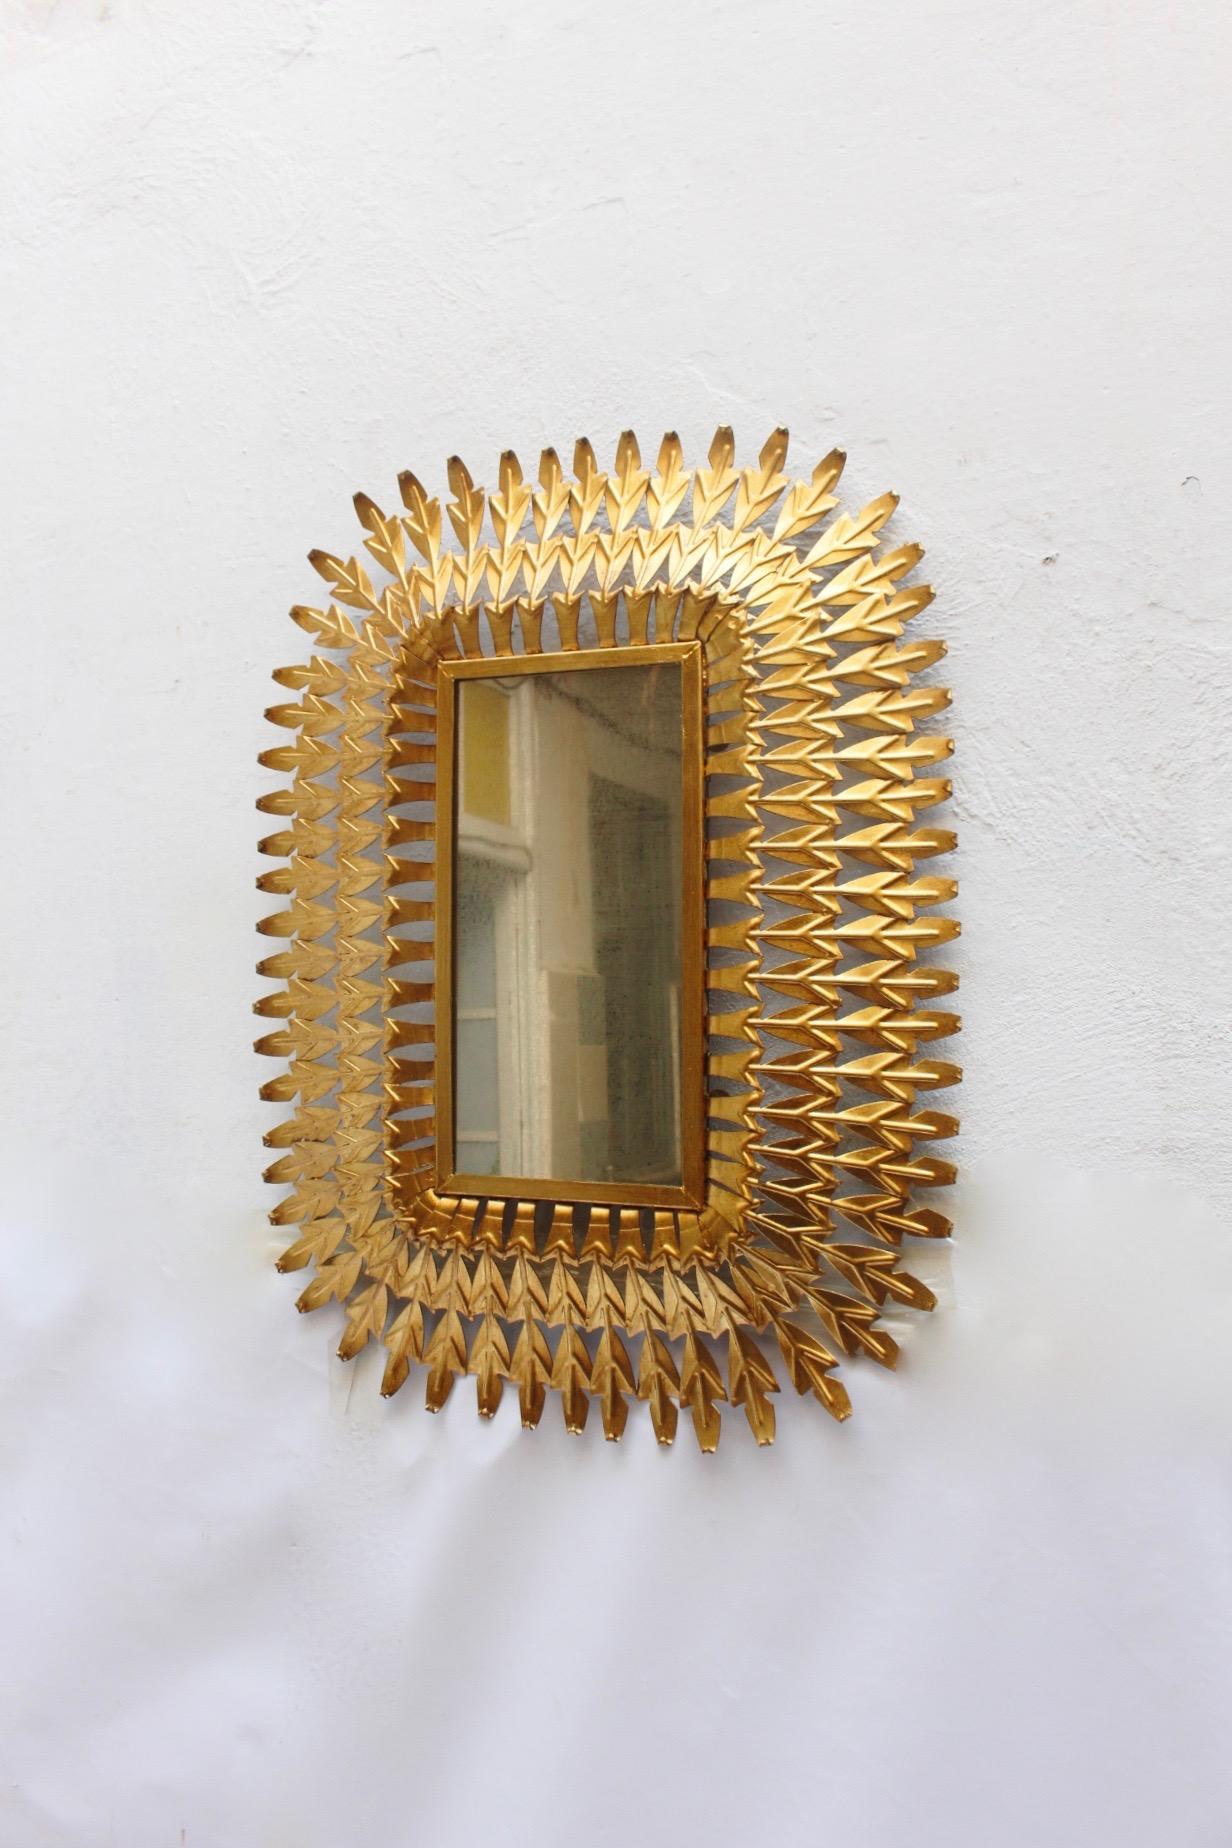 Midcentury large sunburst iron mirror, made in Spain during the 1950s.
The piece has been restored with gold leaf technic and remains with original mirror, featuring visible wear. We do prefer to leave the original mirror in its original condition.